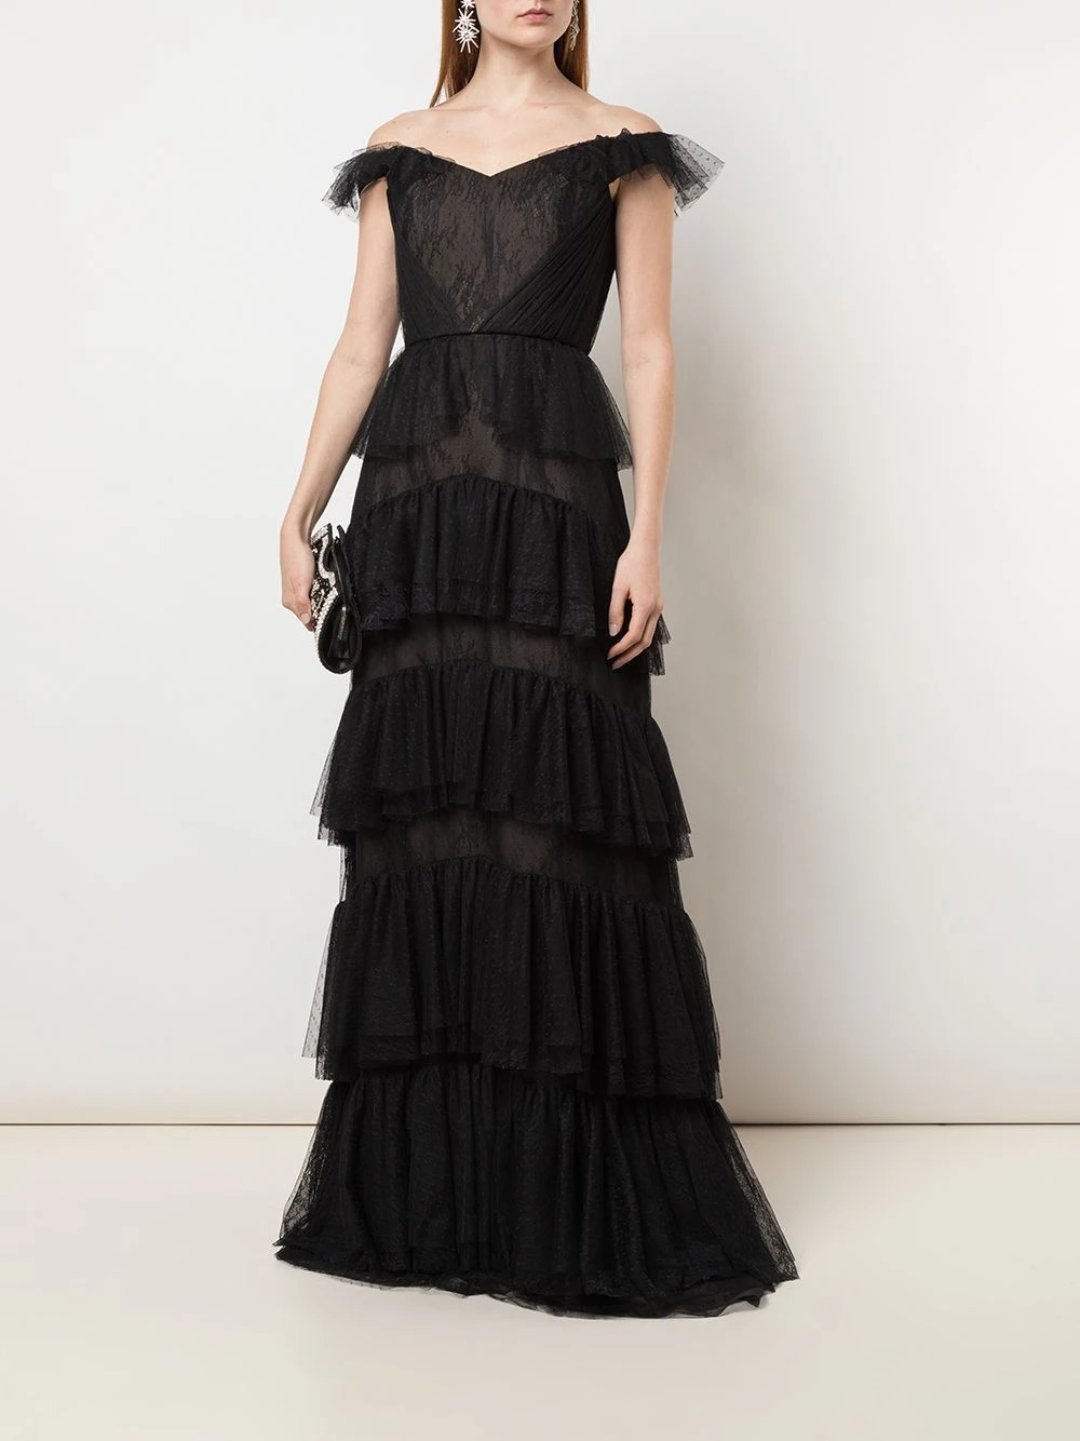 black tiered gown